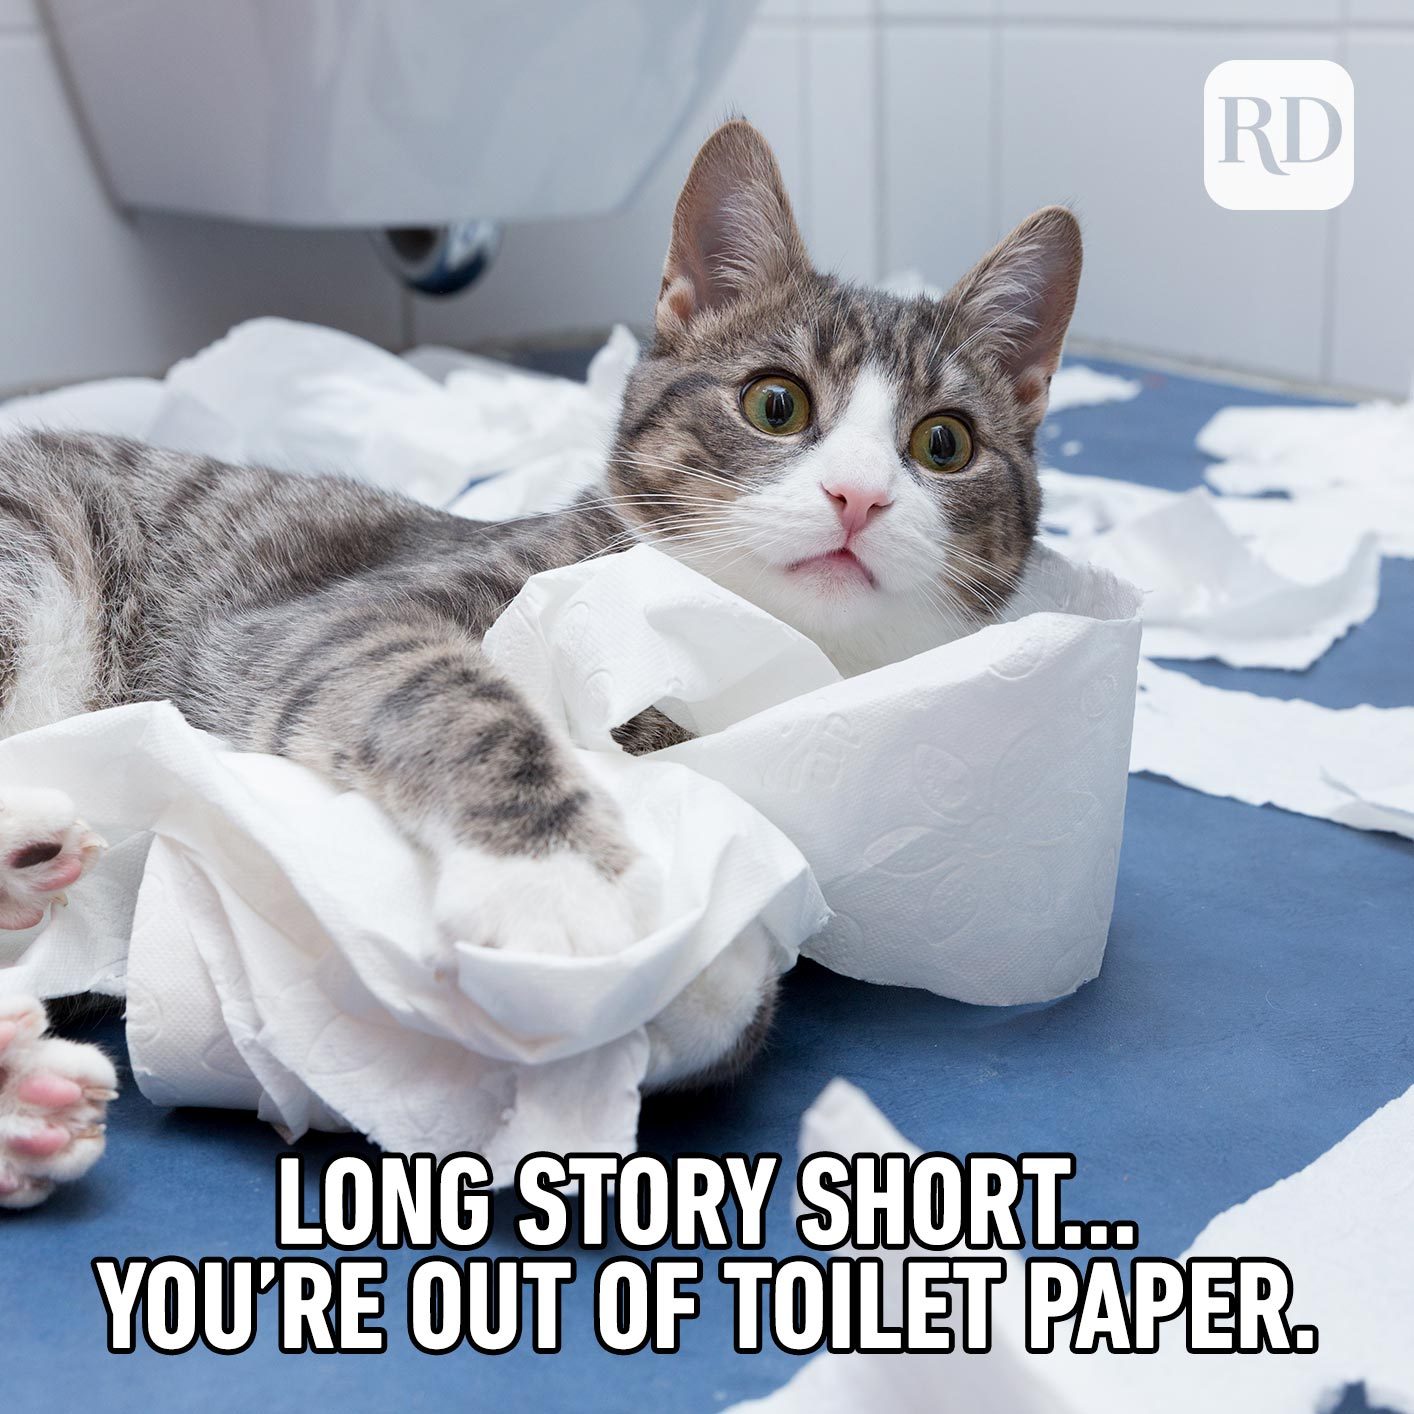 35 Cat Memes You'll Laugh at Every Time | Reader's Digest